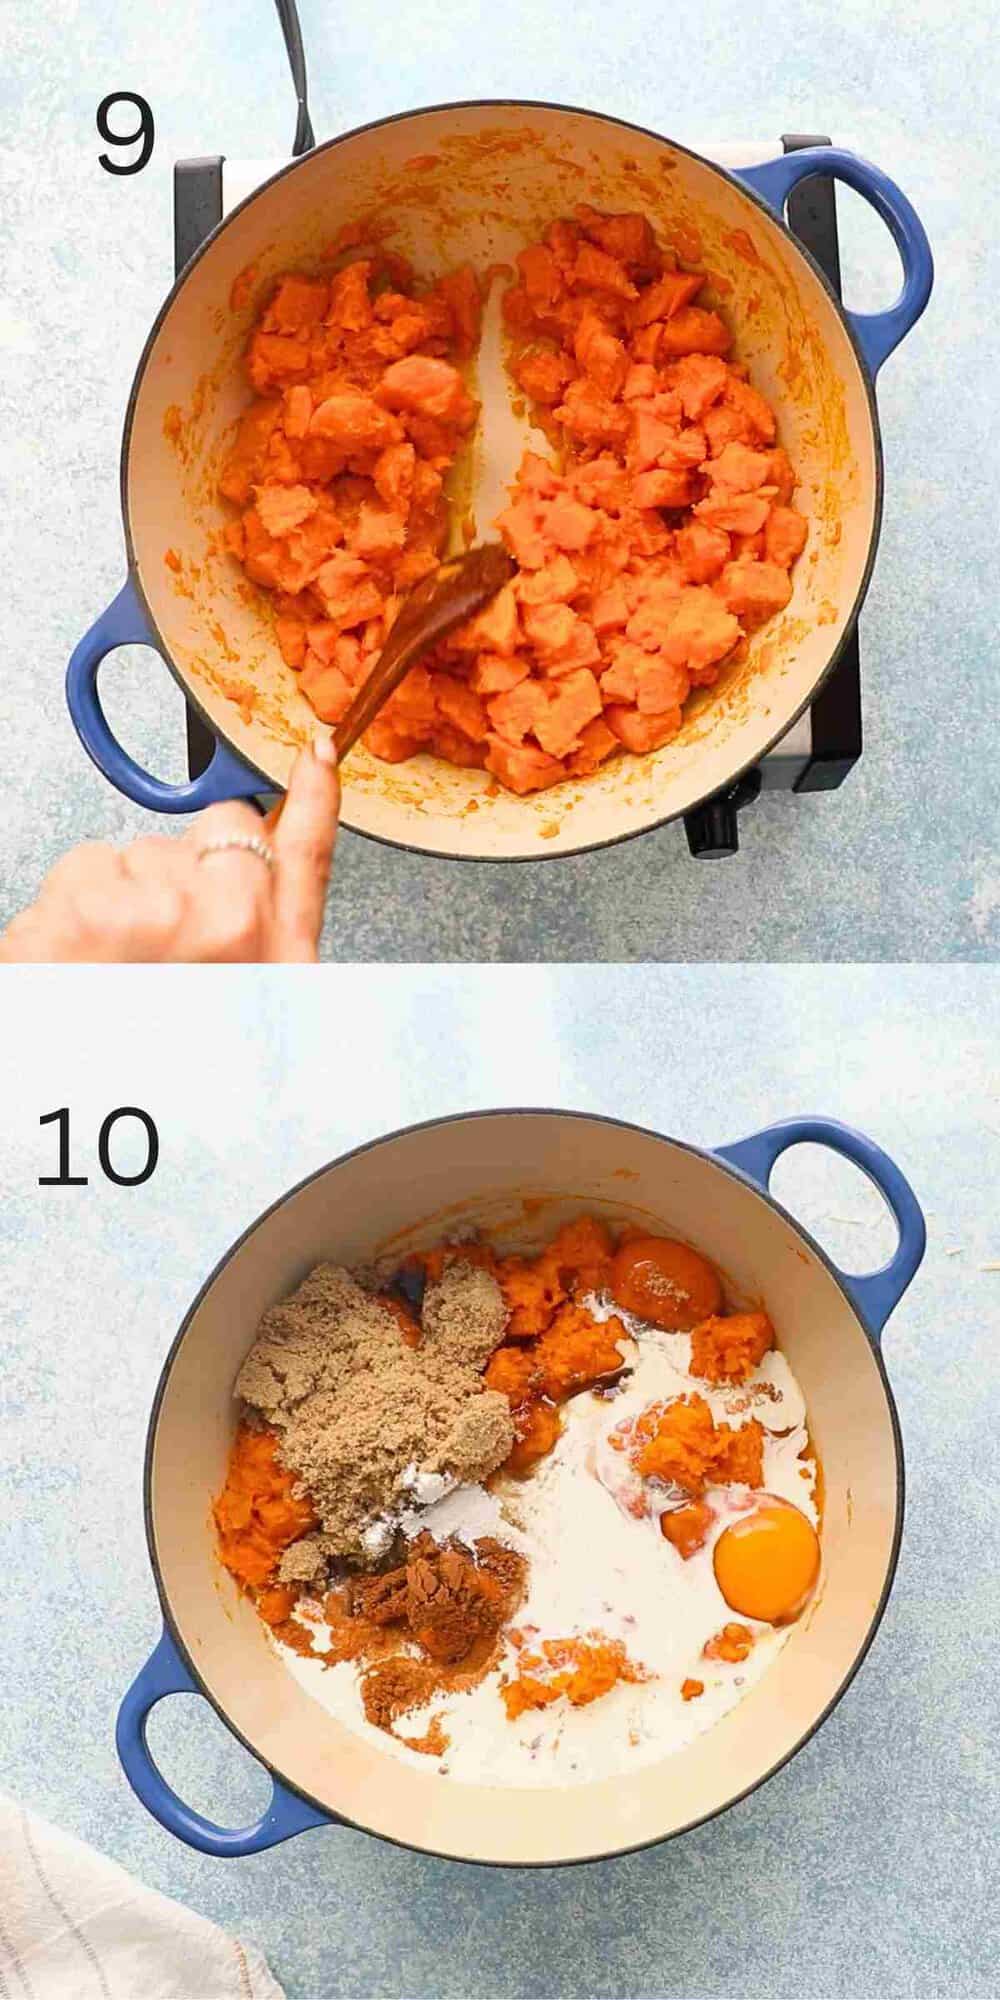 2 photo collage of cooked sweet potatoes along with eggs, cream and brown sugar in a blue saucepan.